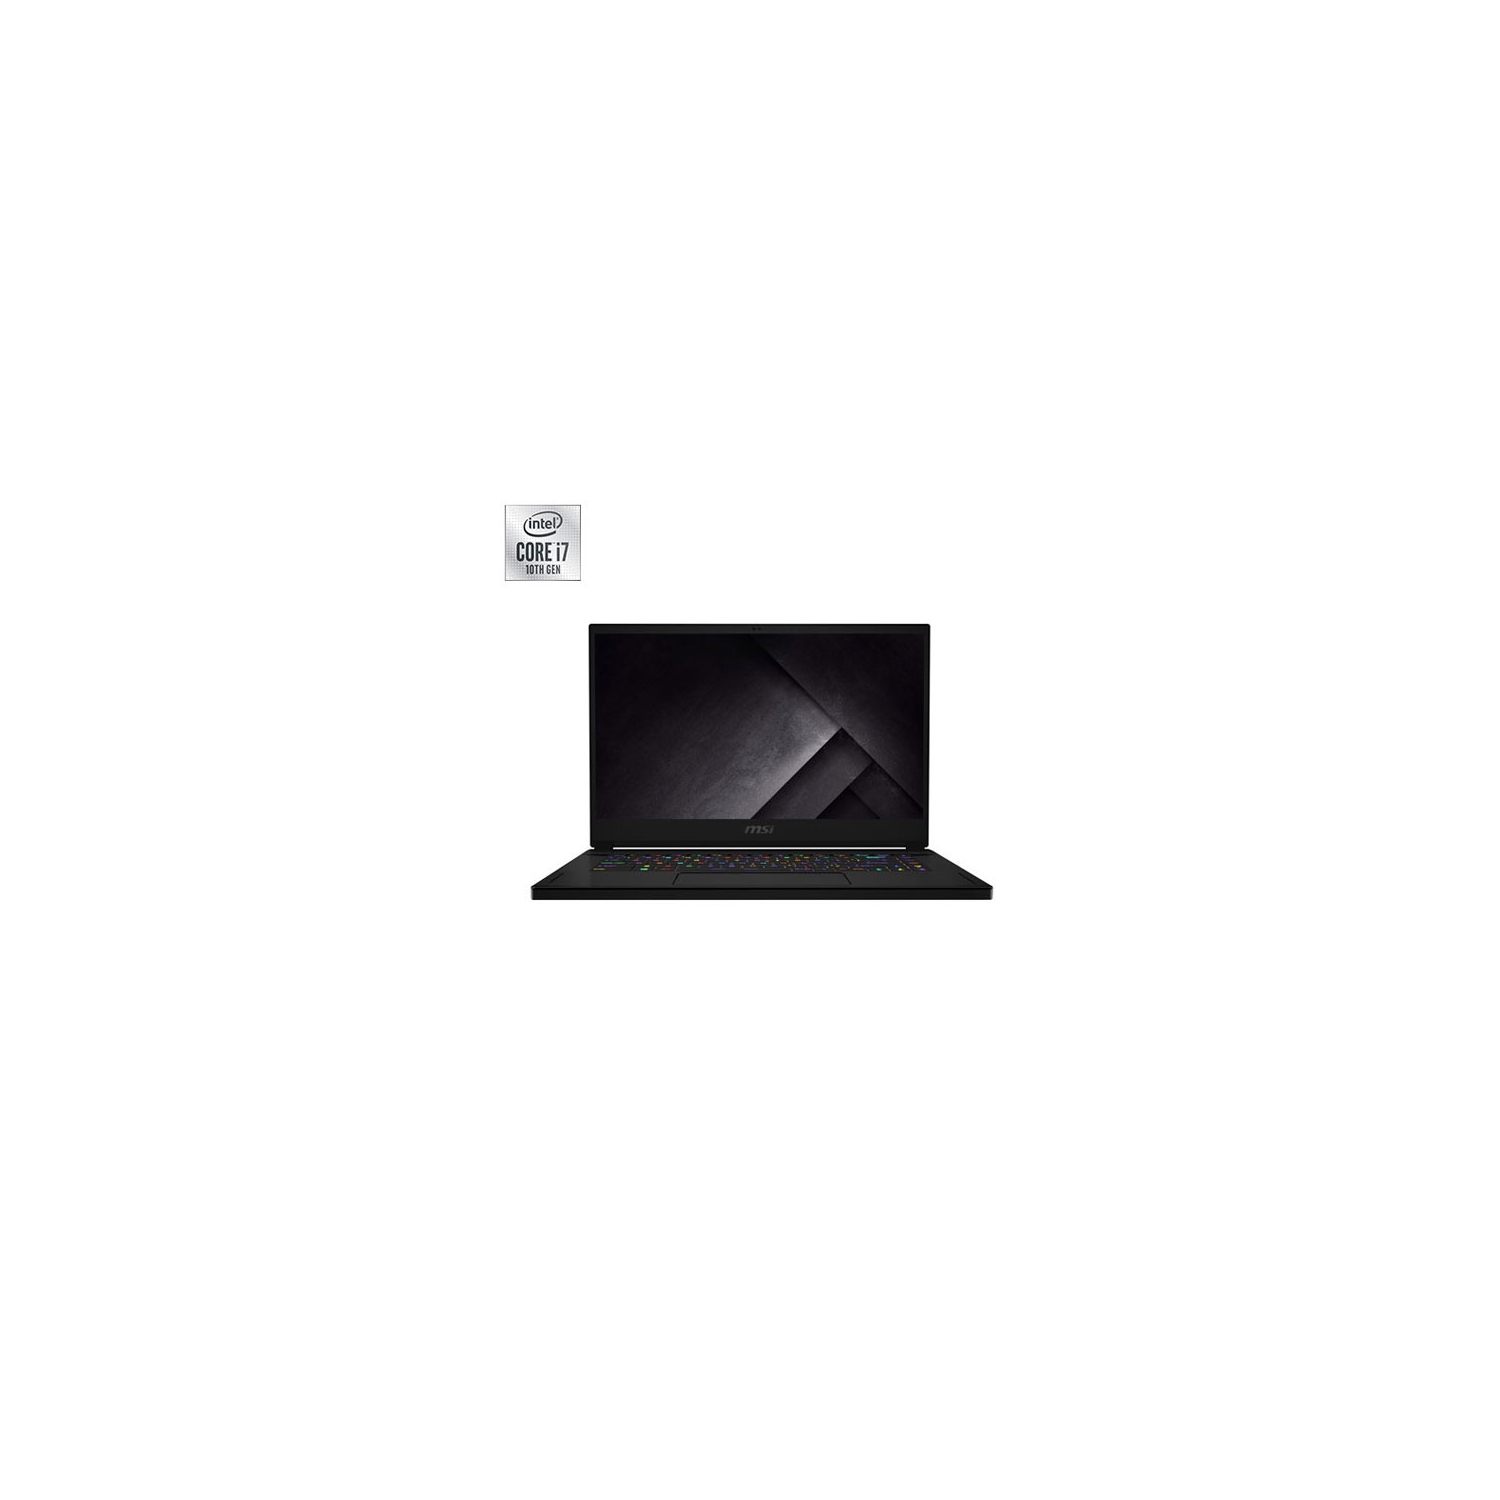 Refurbished (Excellent) - MSI GS66 Stealth 15.6" Gaming Laptop (Intel Core i7-10750H/1TB SSD/GeForce RTX 3060)